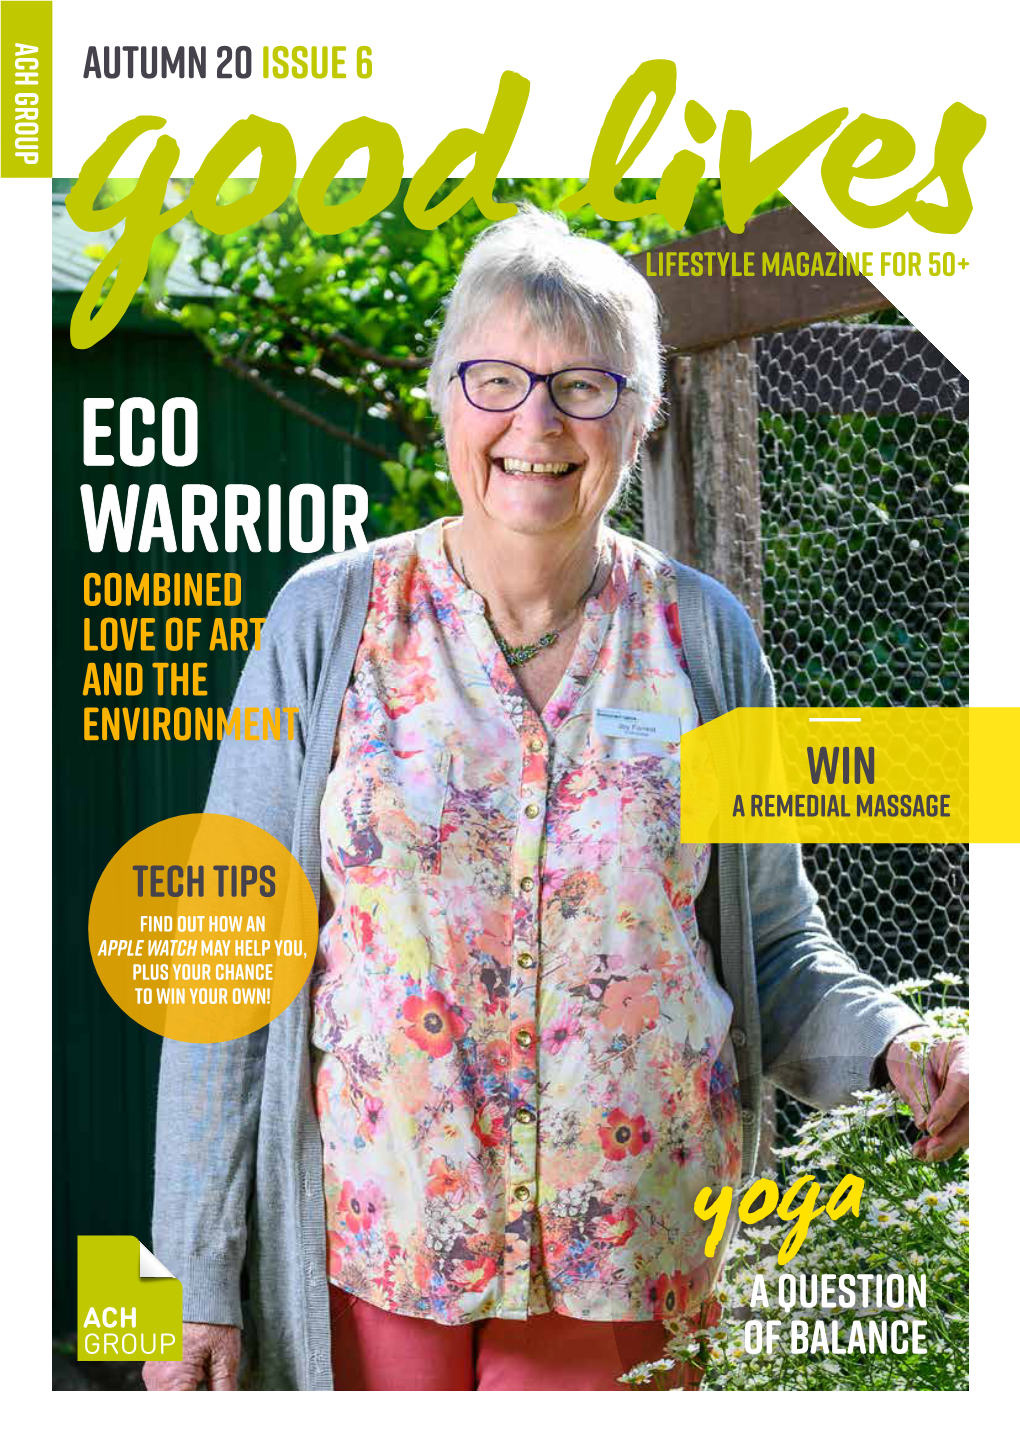 Eco Warrior Combined Love of Art and the Environment WIN a Remedial Massage Tech Tips Find out How an Apple Watch May Help You, Plus Your Chance to Win Your Own!